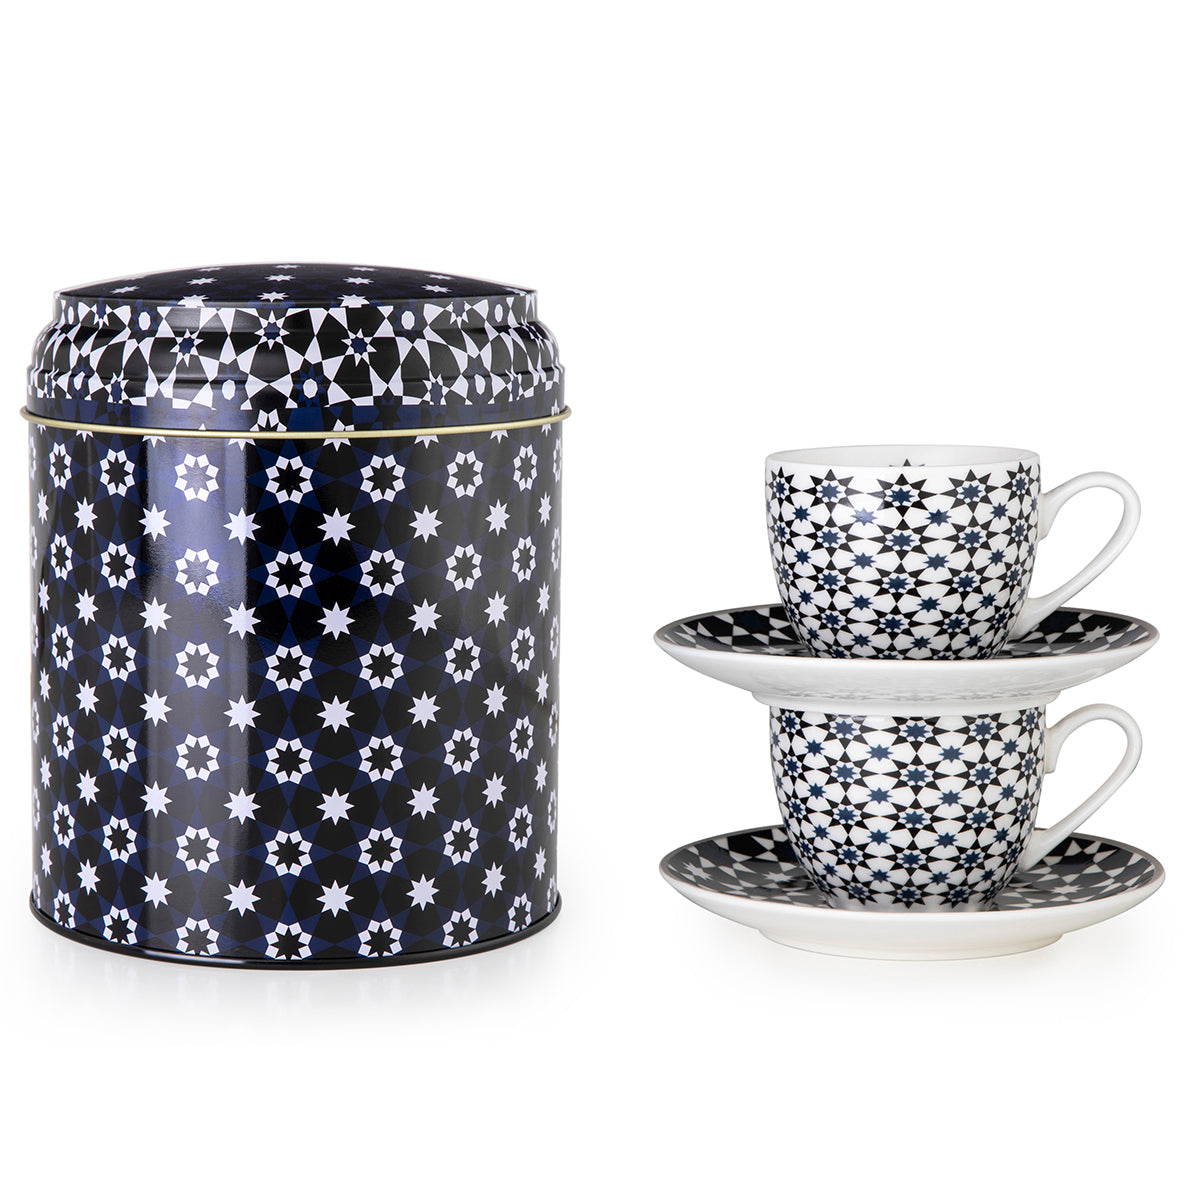 Shop The Latest Collection Of Images D'Orient Tin Box With 2 Cups And Saucer Kaokab -  90 Ml - Por-922022 In Lebanon